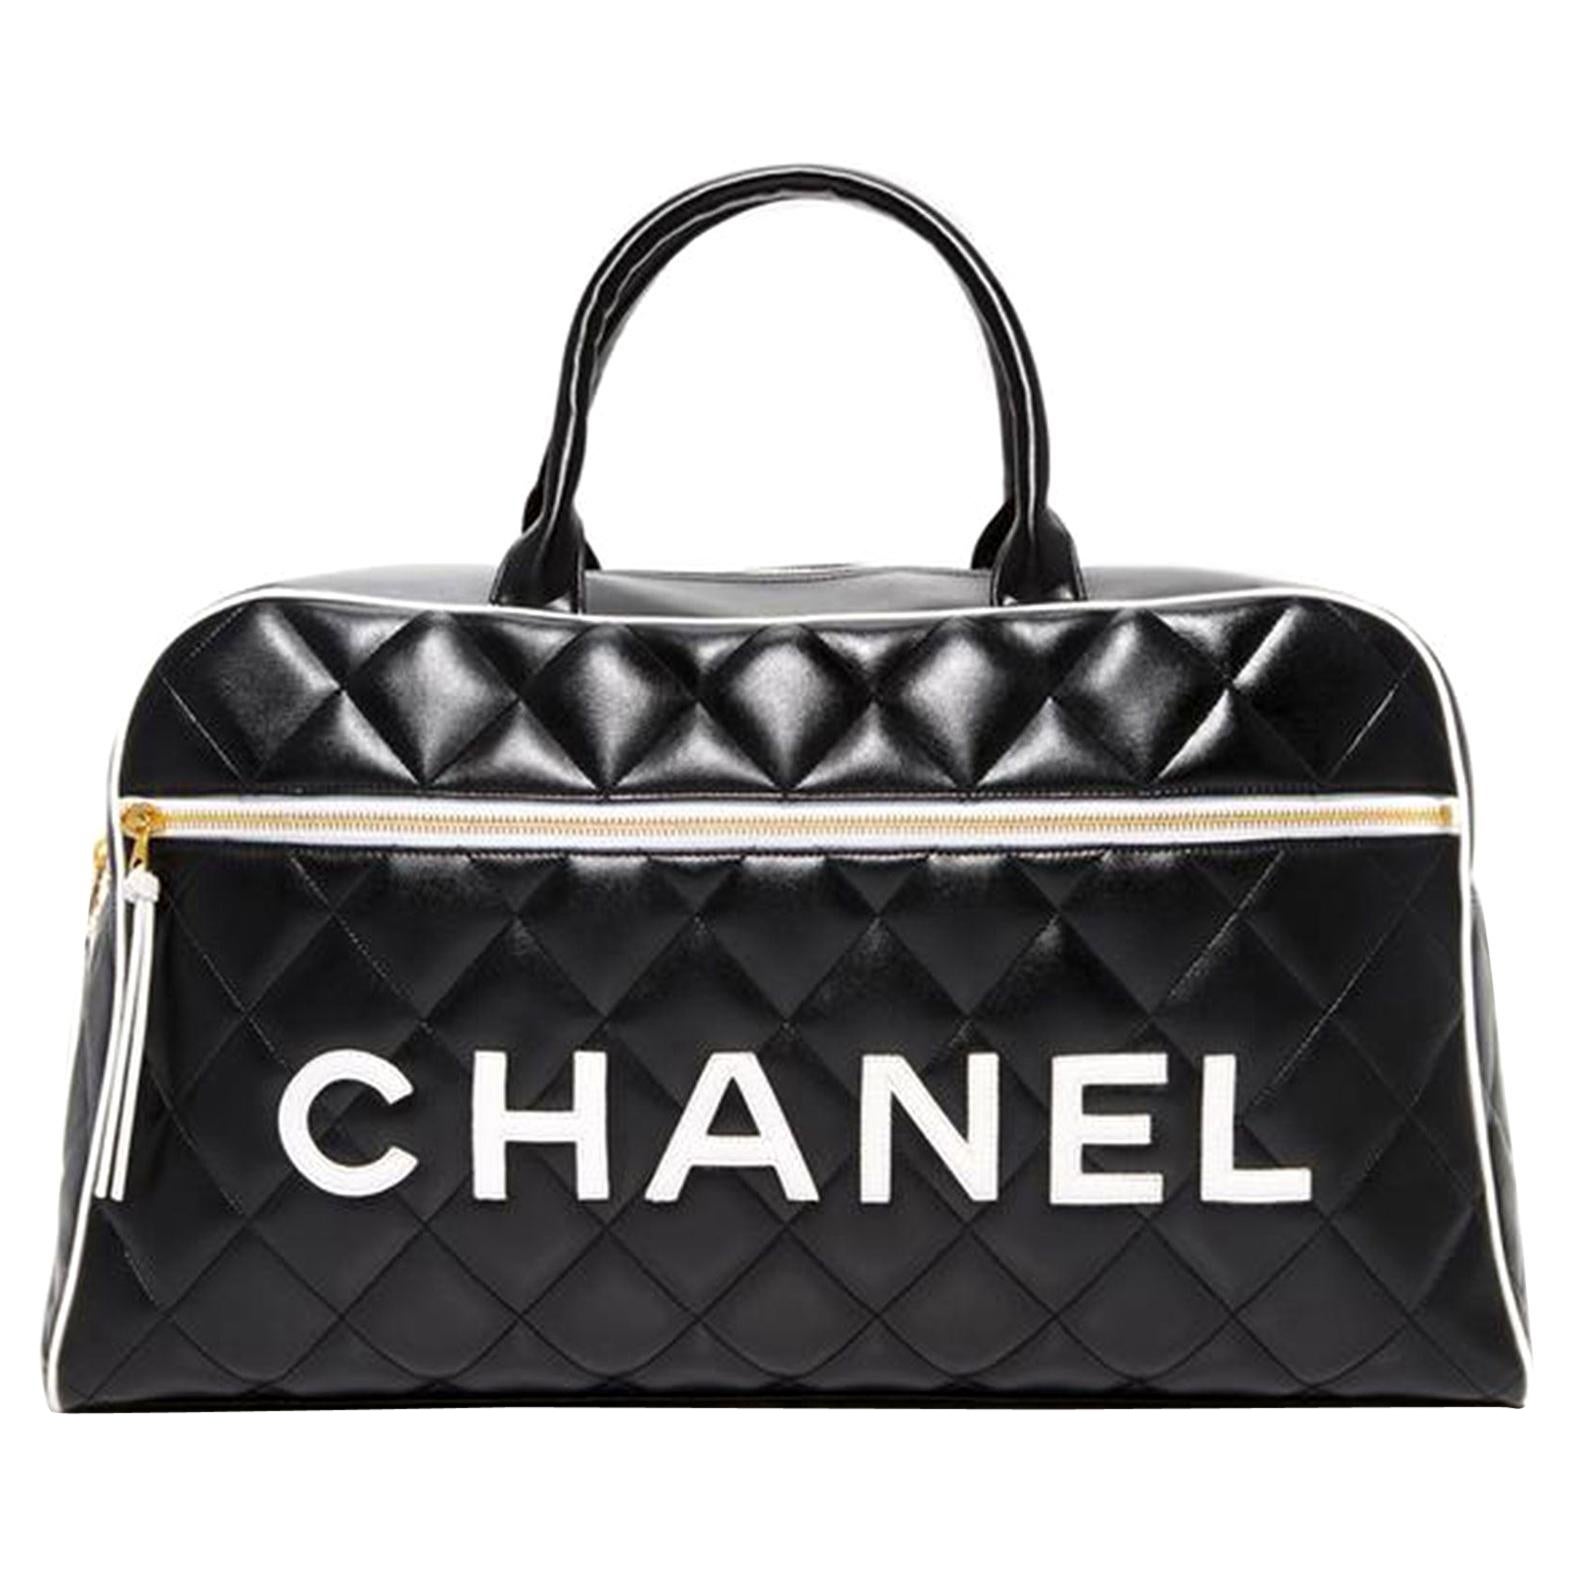 Chanel Limited Edition Vintage Duffel Tote White and Black Leather ...